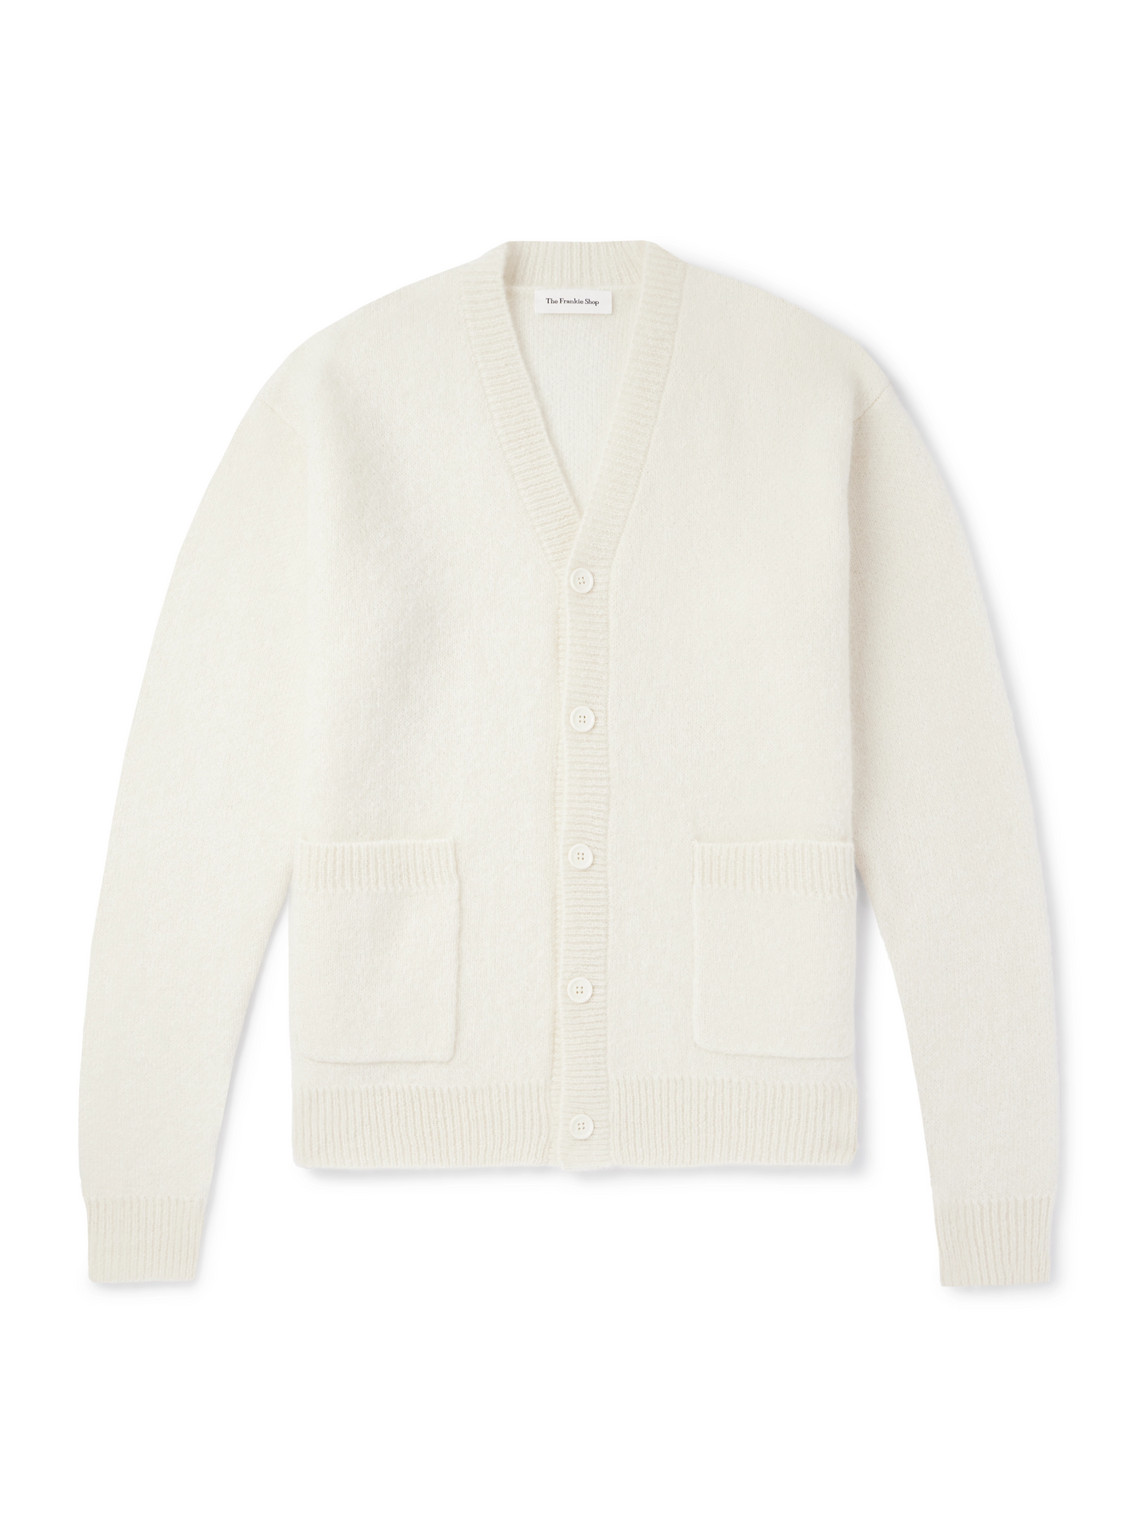 The Frankie Shop Lucas Ribbed-knit Cardigan In White